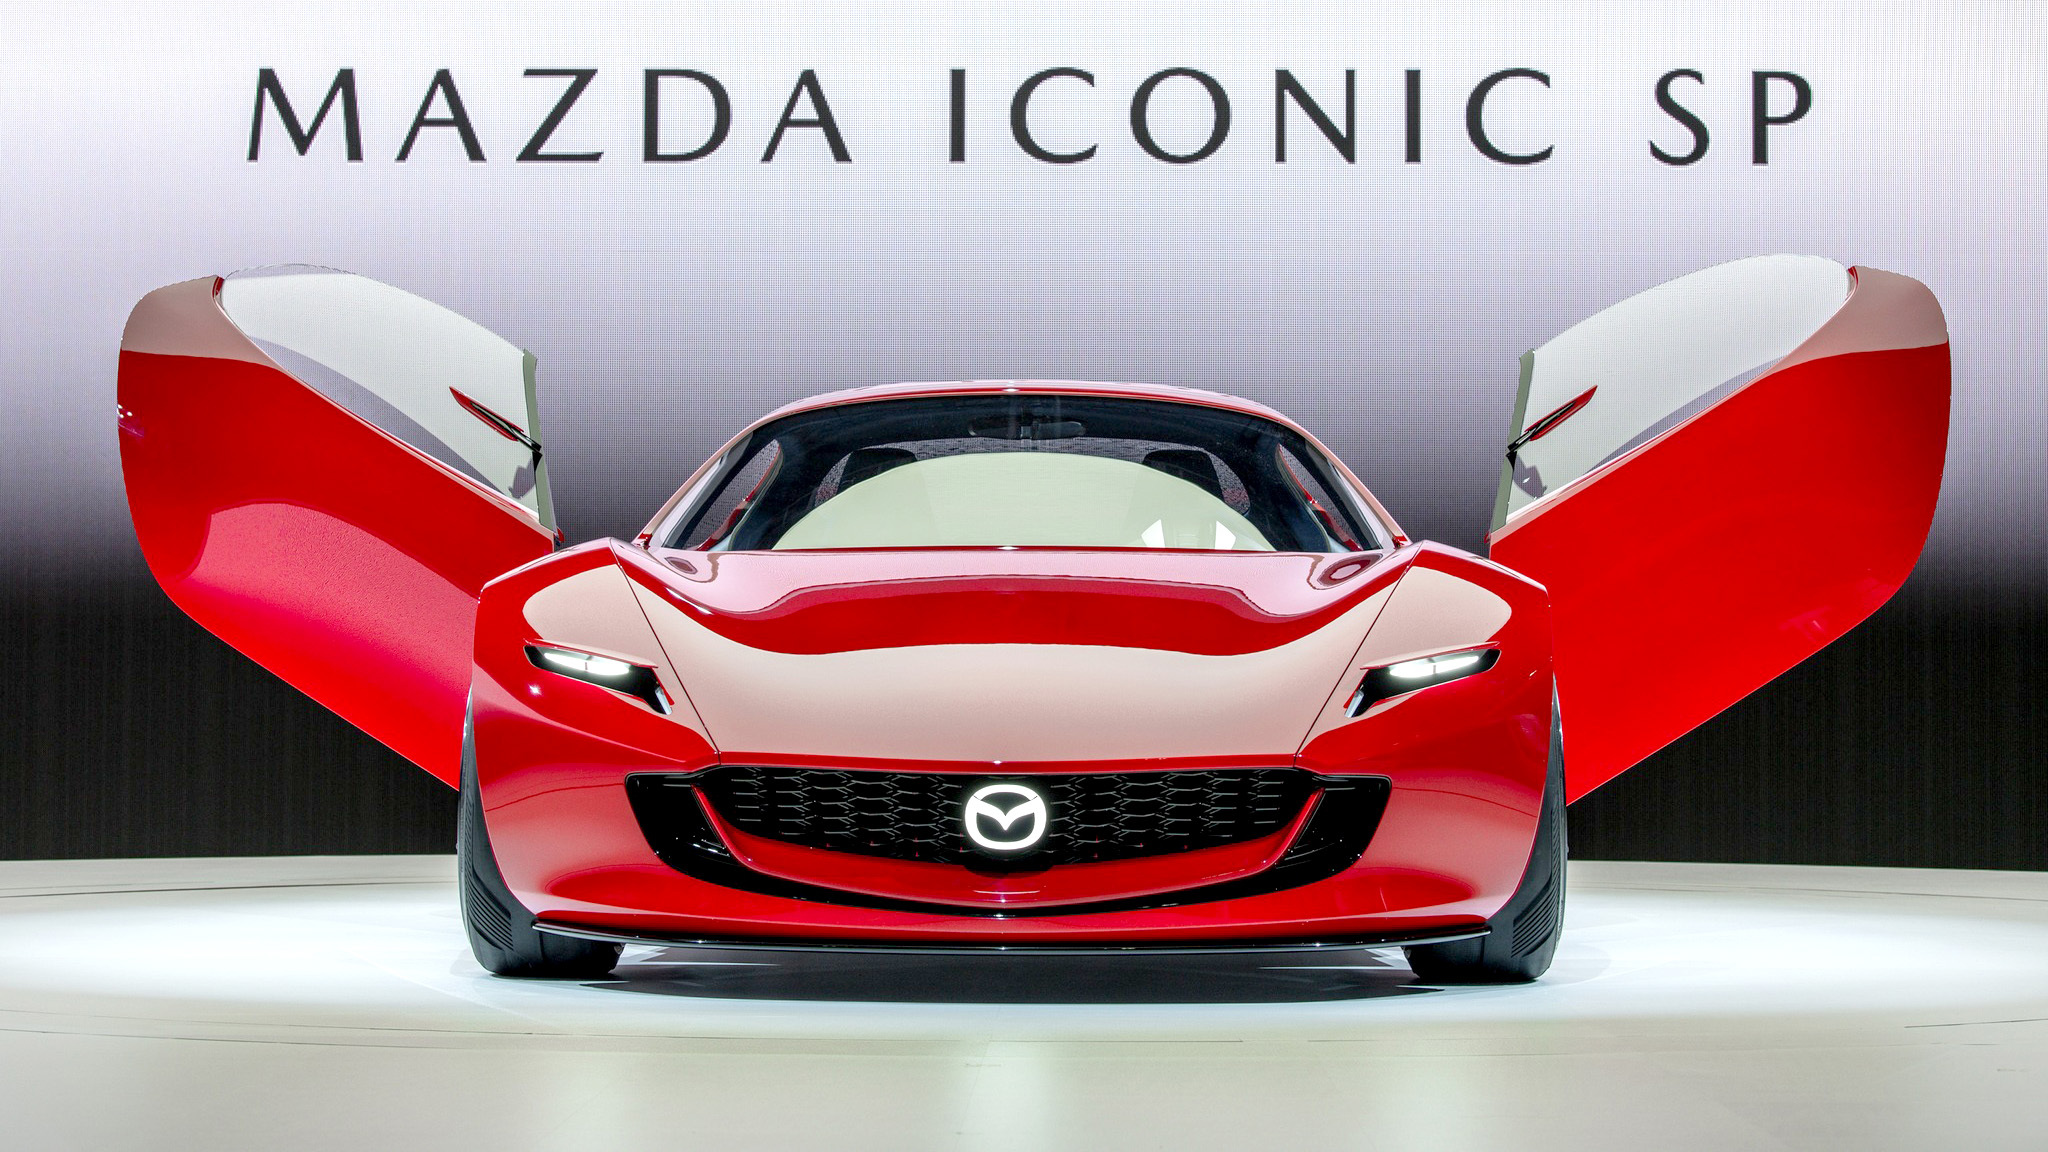 Mazda Iconic SP Is A 365 HP Twin-Rotor Hybrid MX-5 From The Near Future